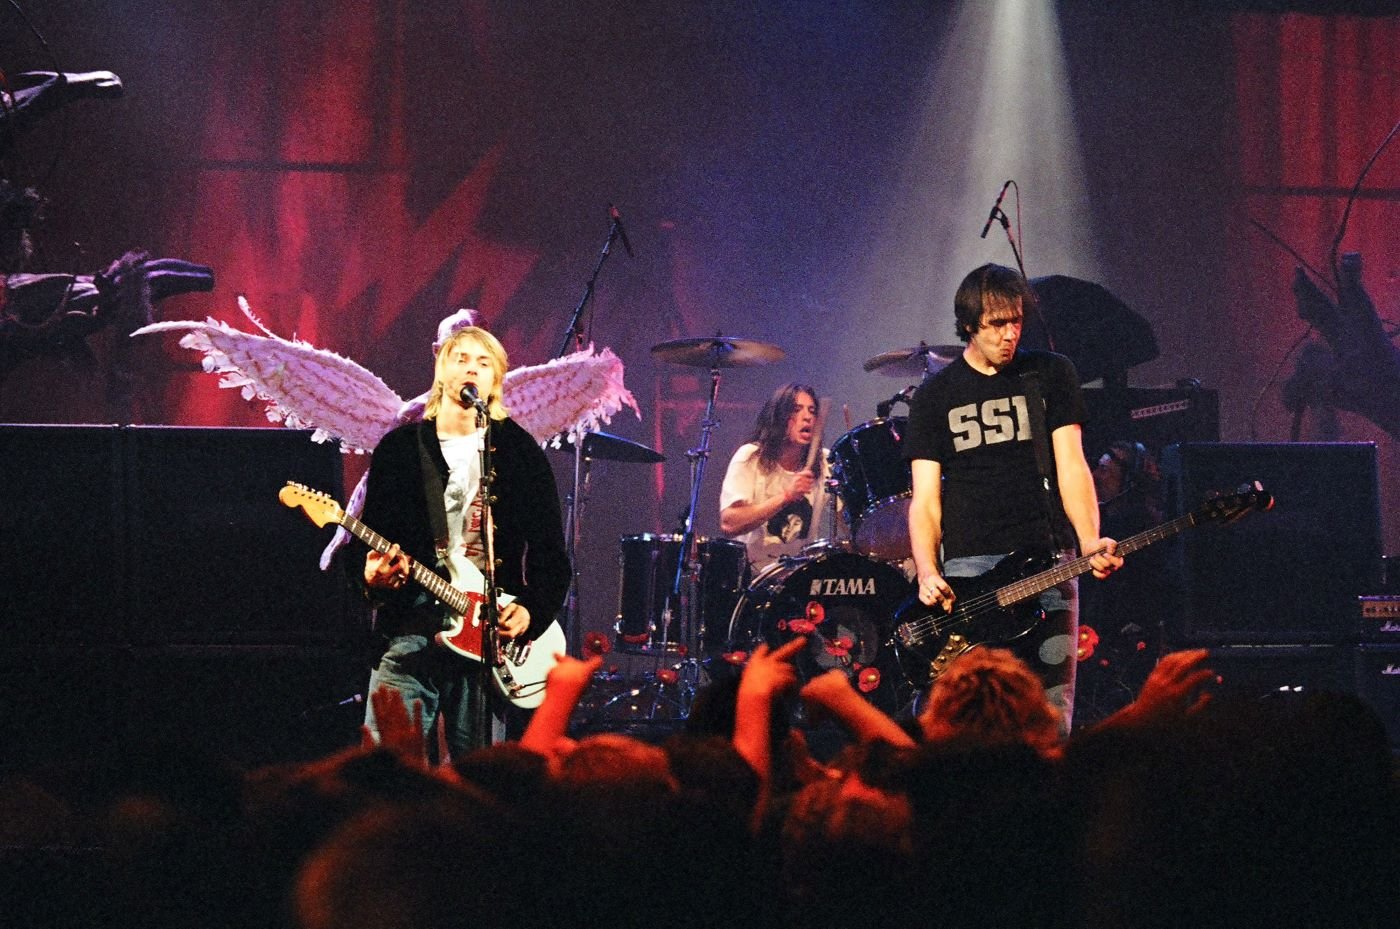 Members of Nirvana on the stage performing.